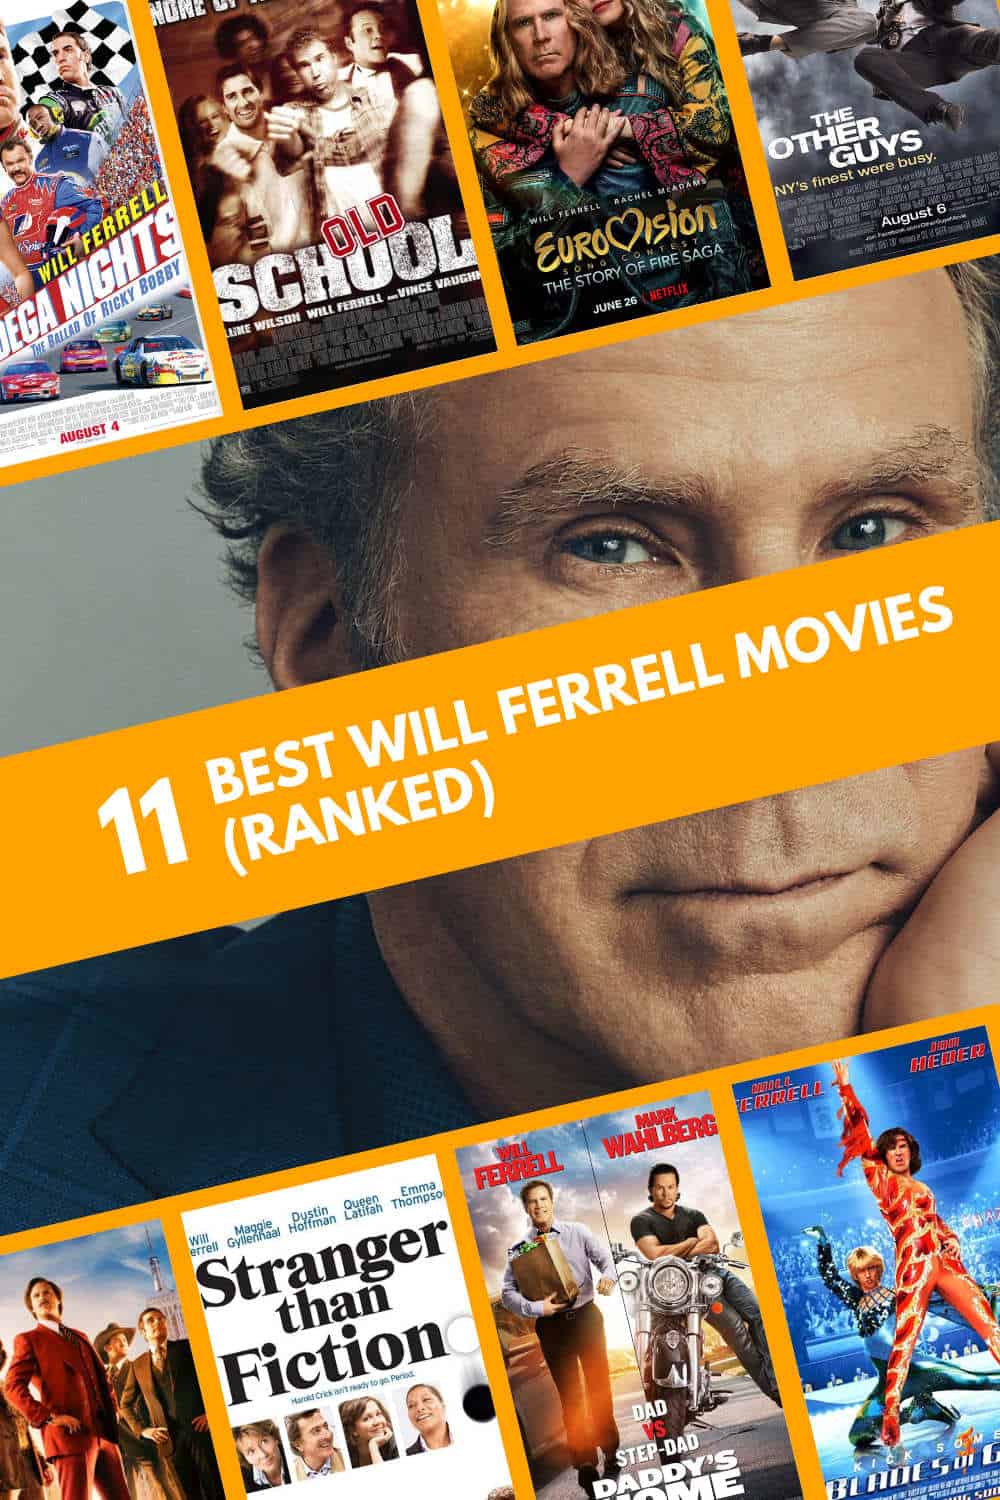 Will Ferrell Movies (Ranked)